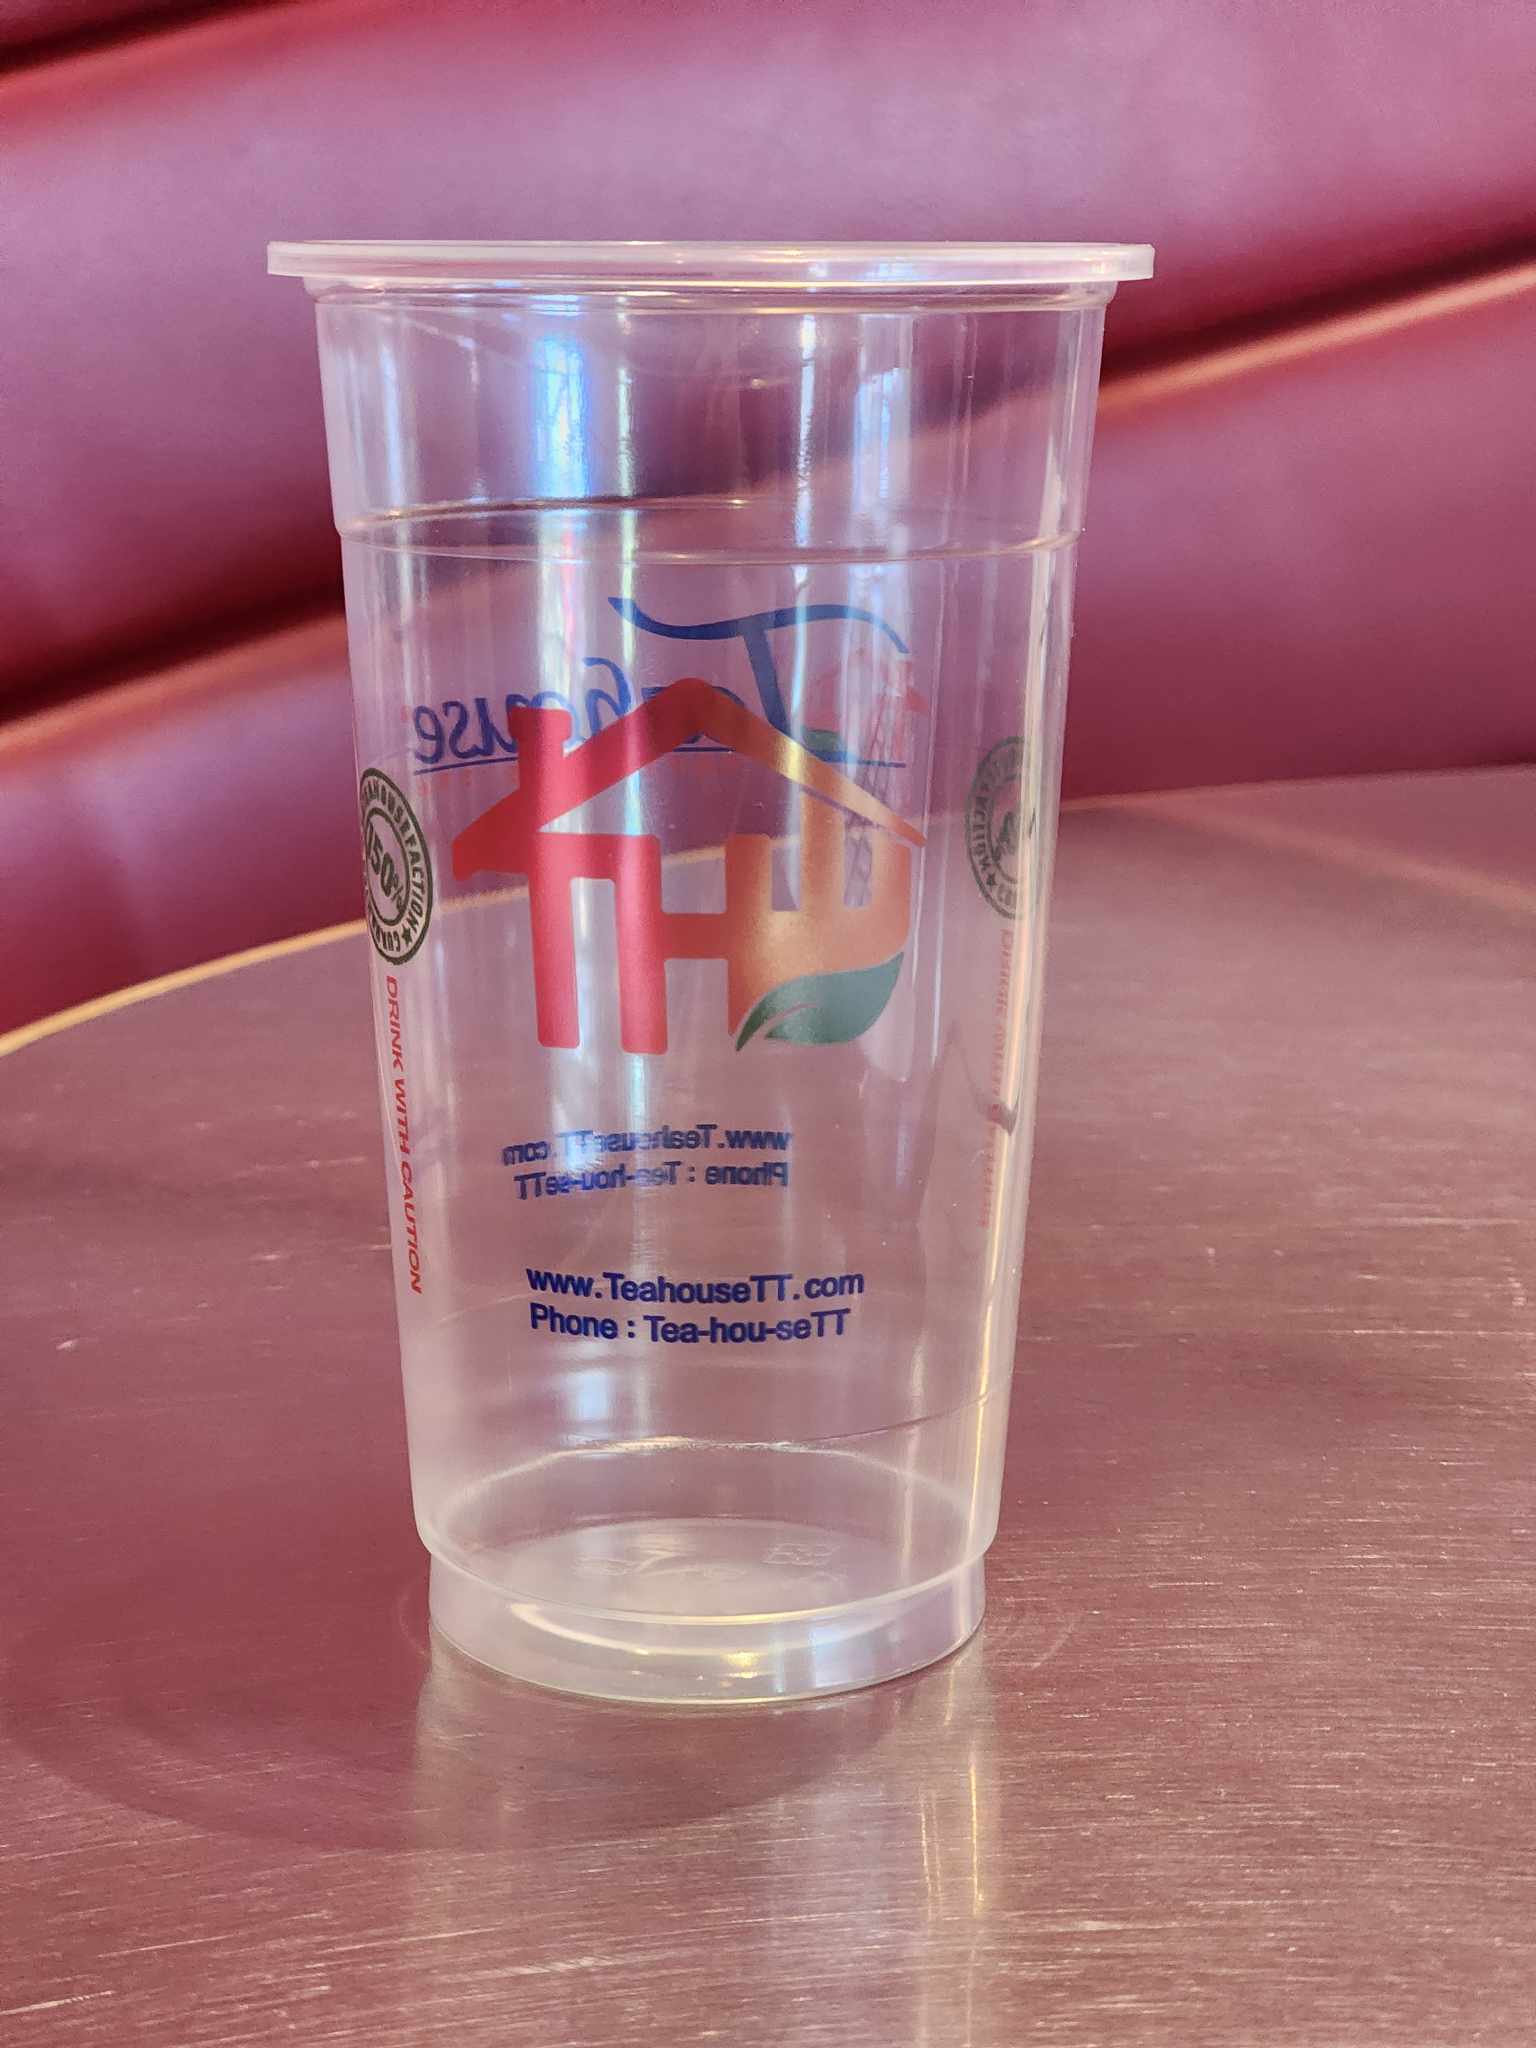 The Teahouse Plastic Cups